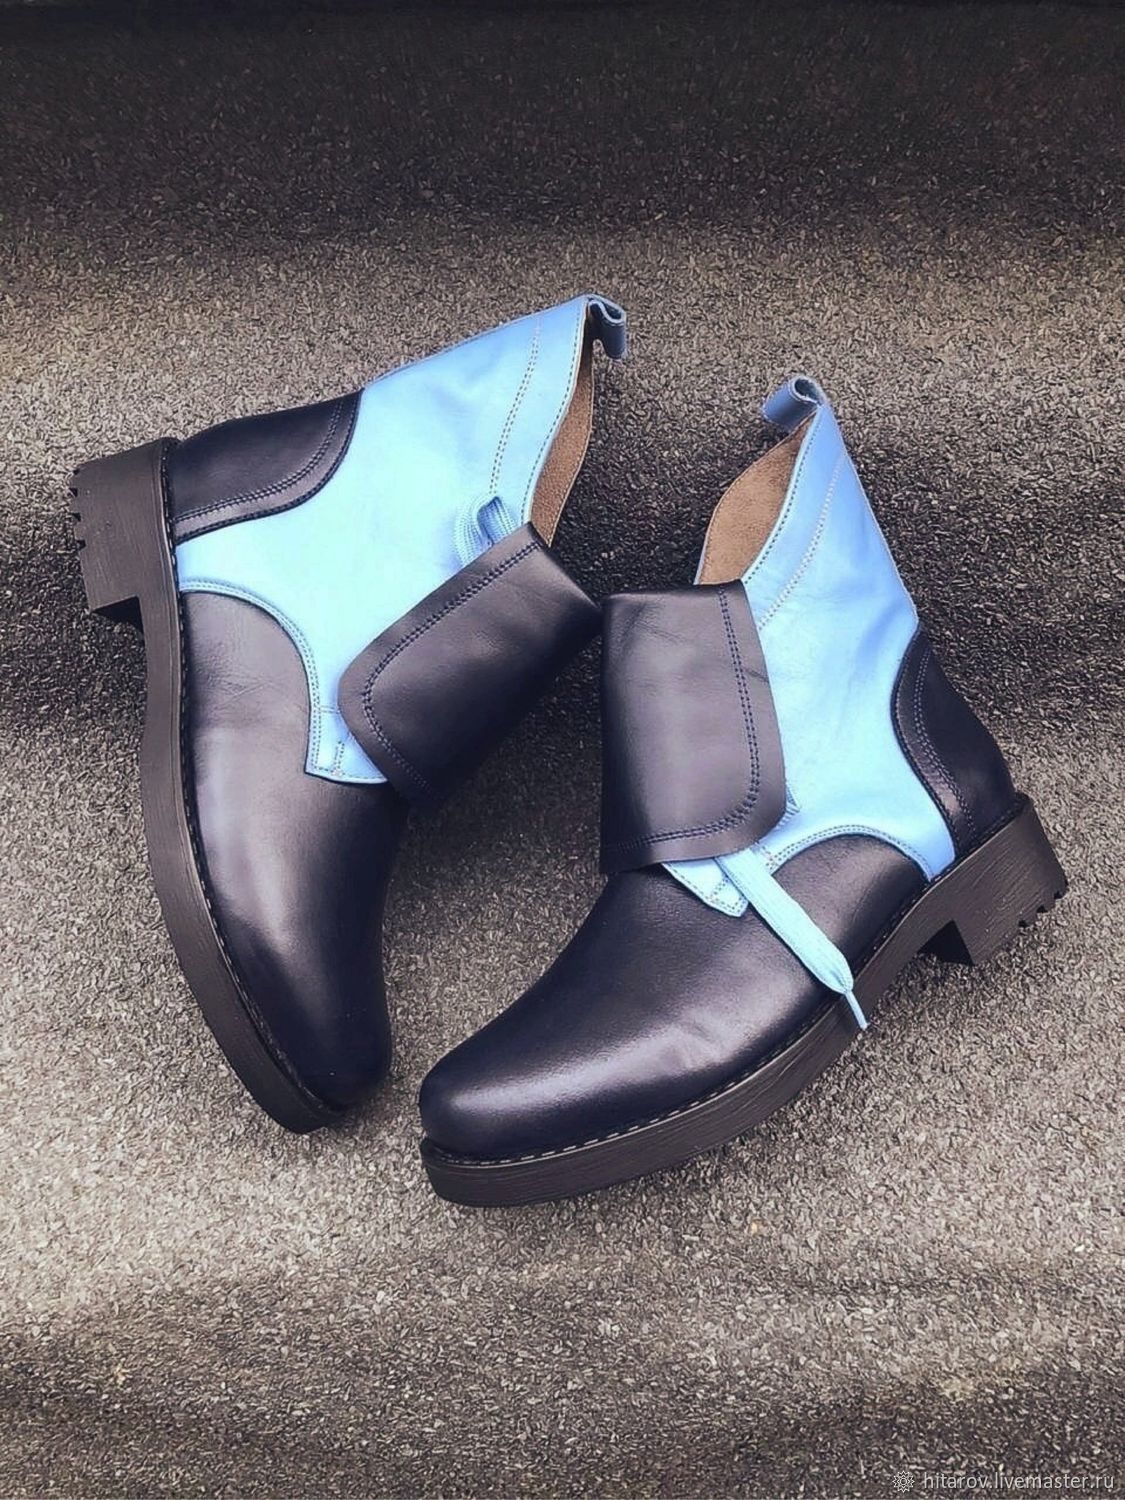 Shoes 'Modern dark blue/light blue' black sole, Boots, Moscow,  Фото №1